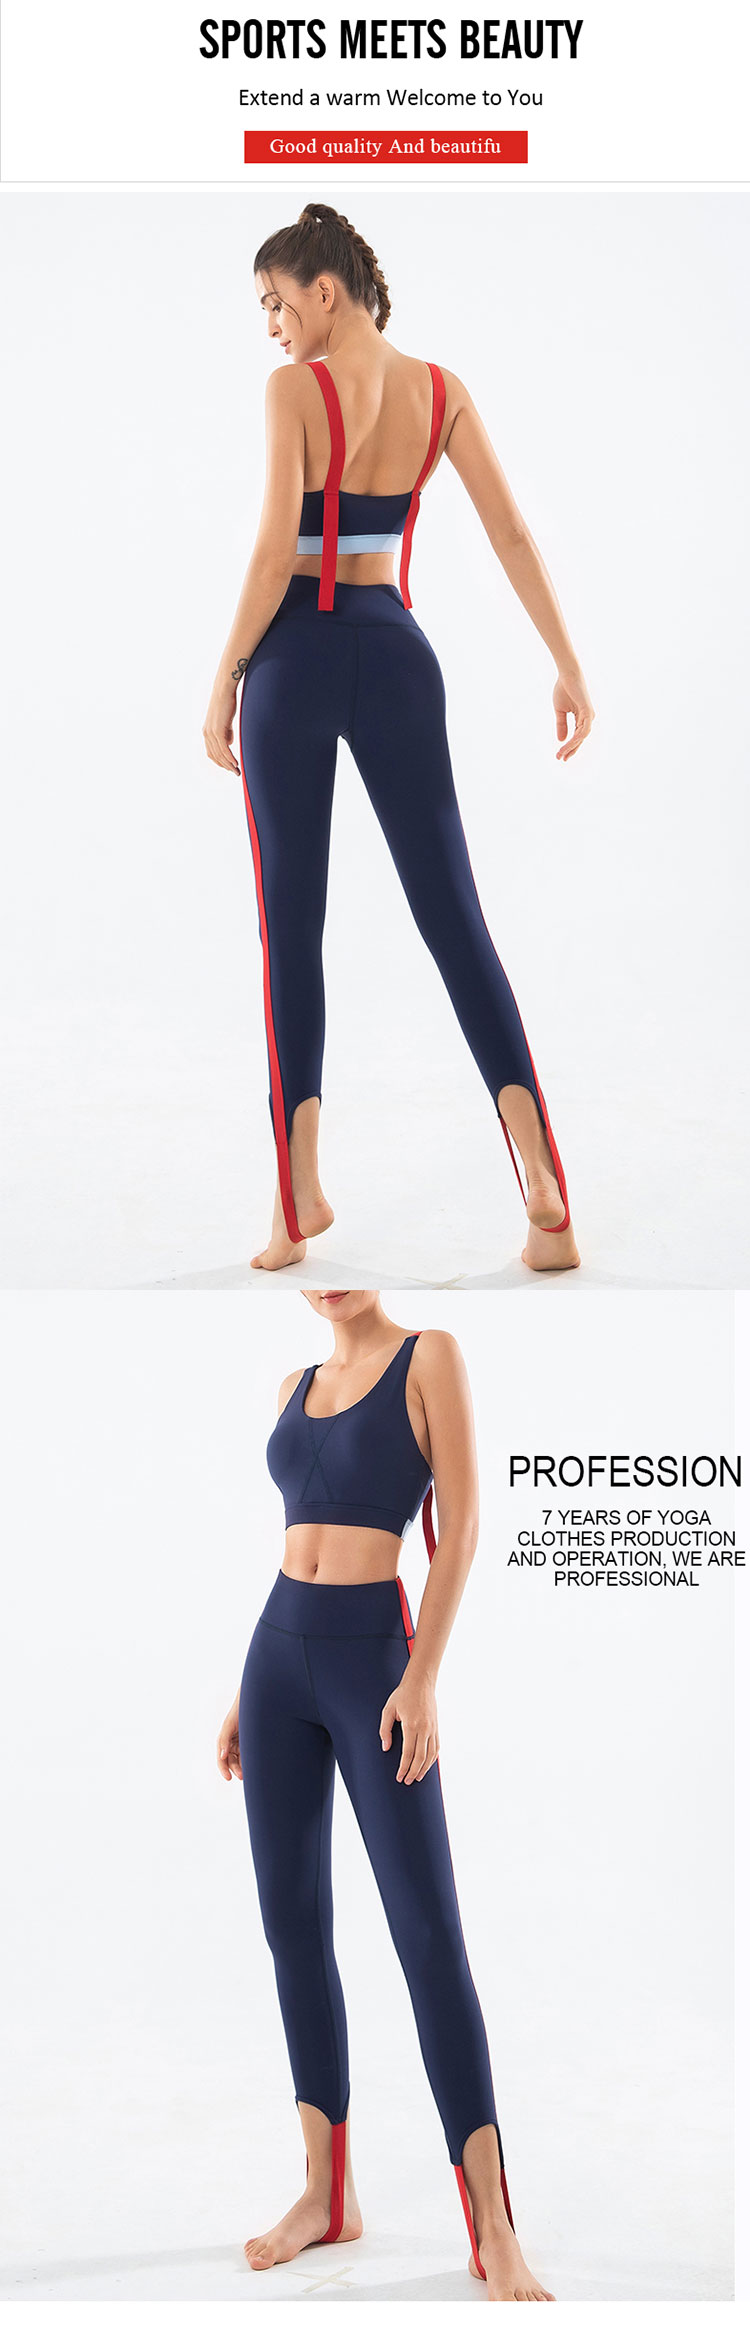 Flowy-yoga-pants-can-show-the-most-slender-pants-visual-effect